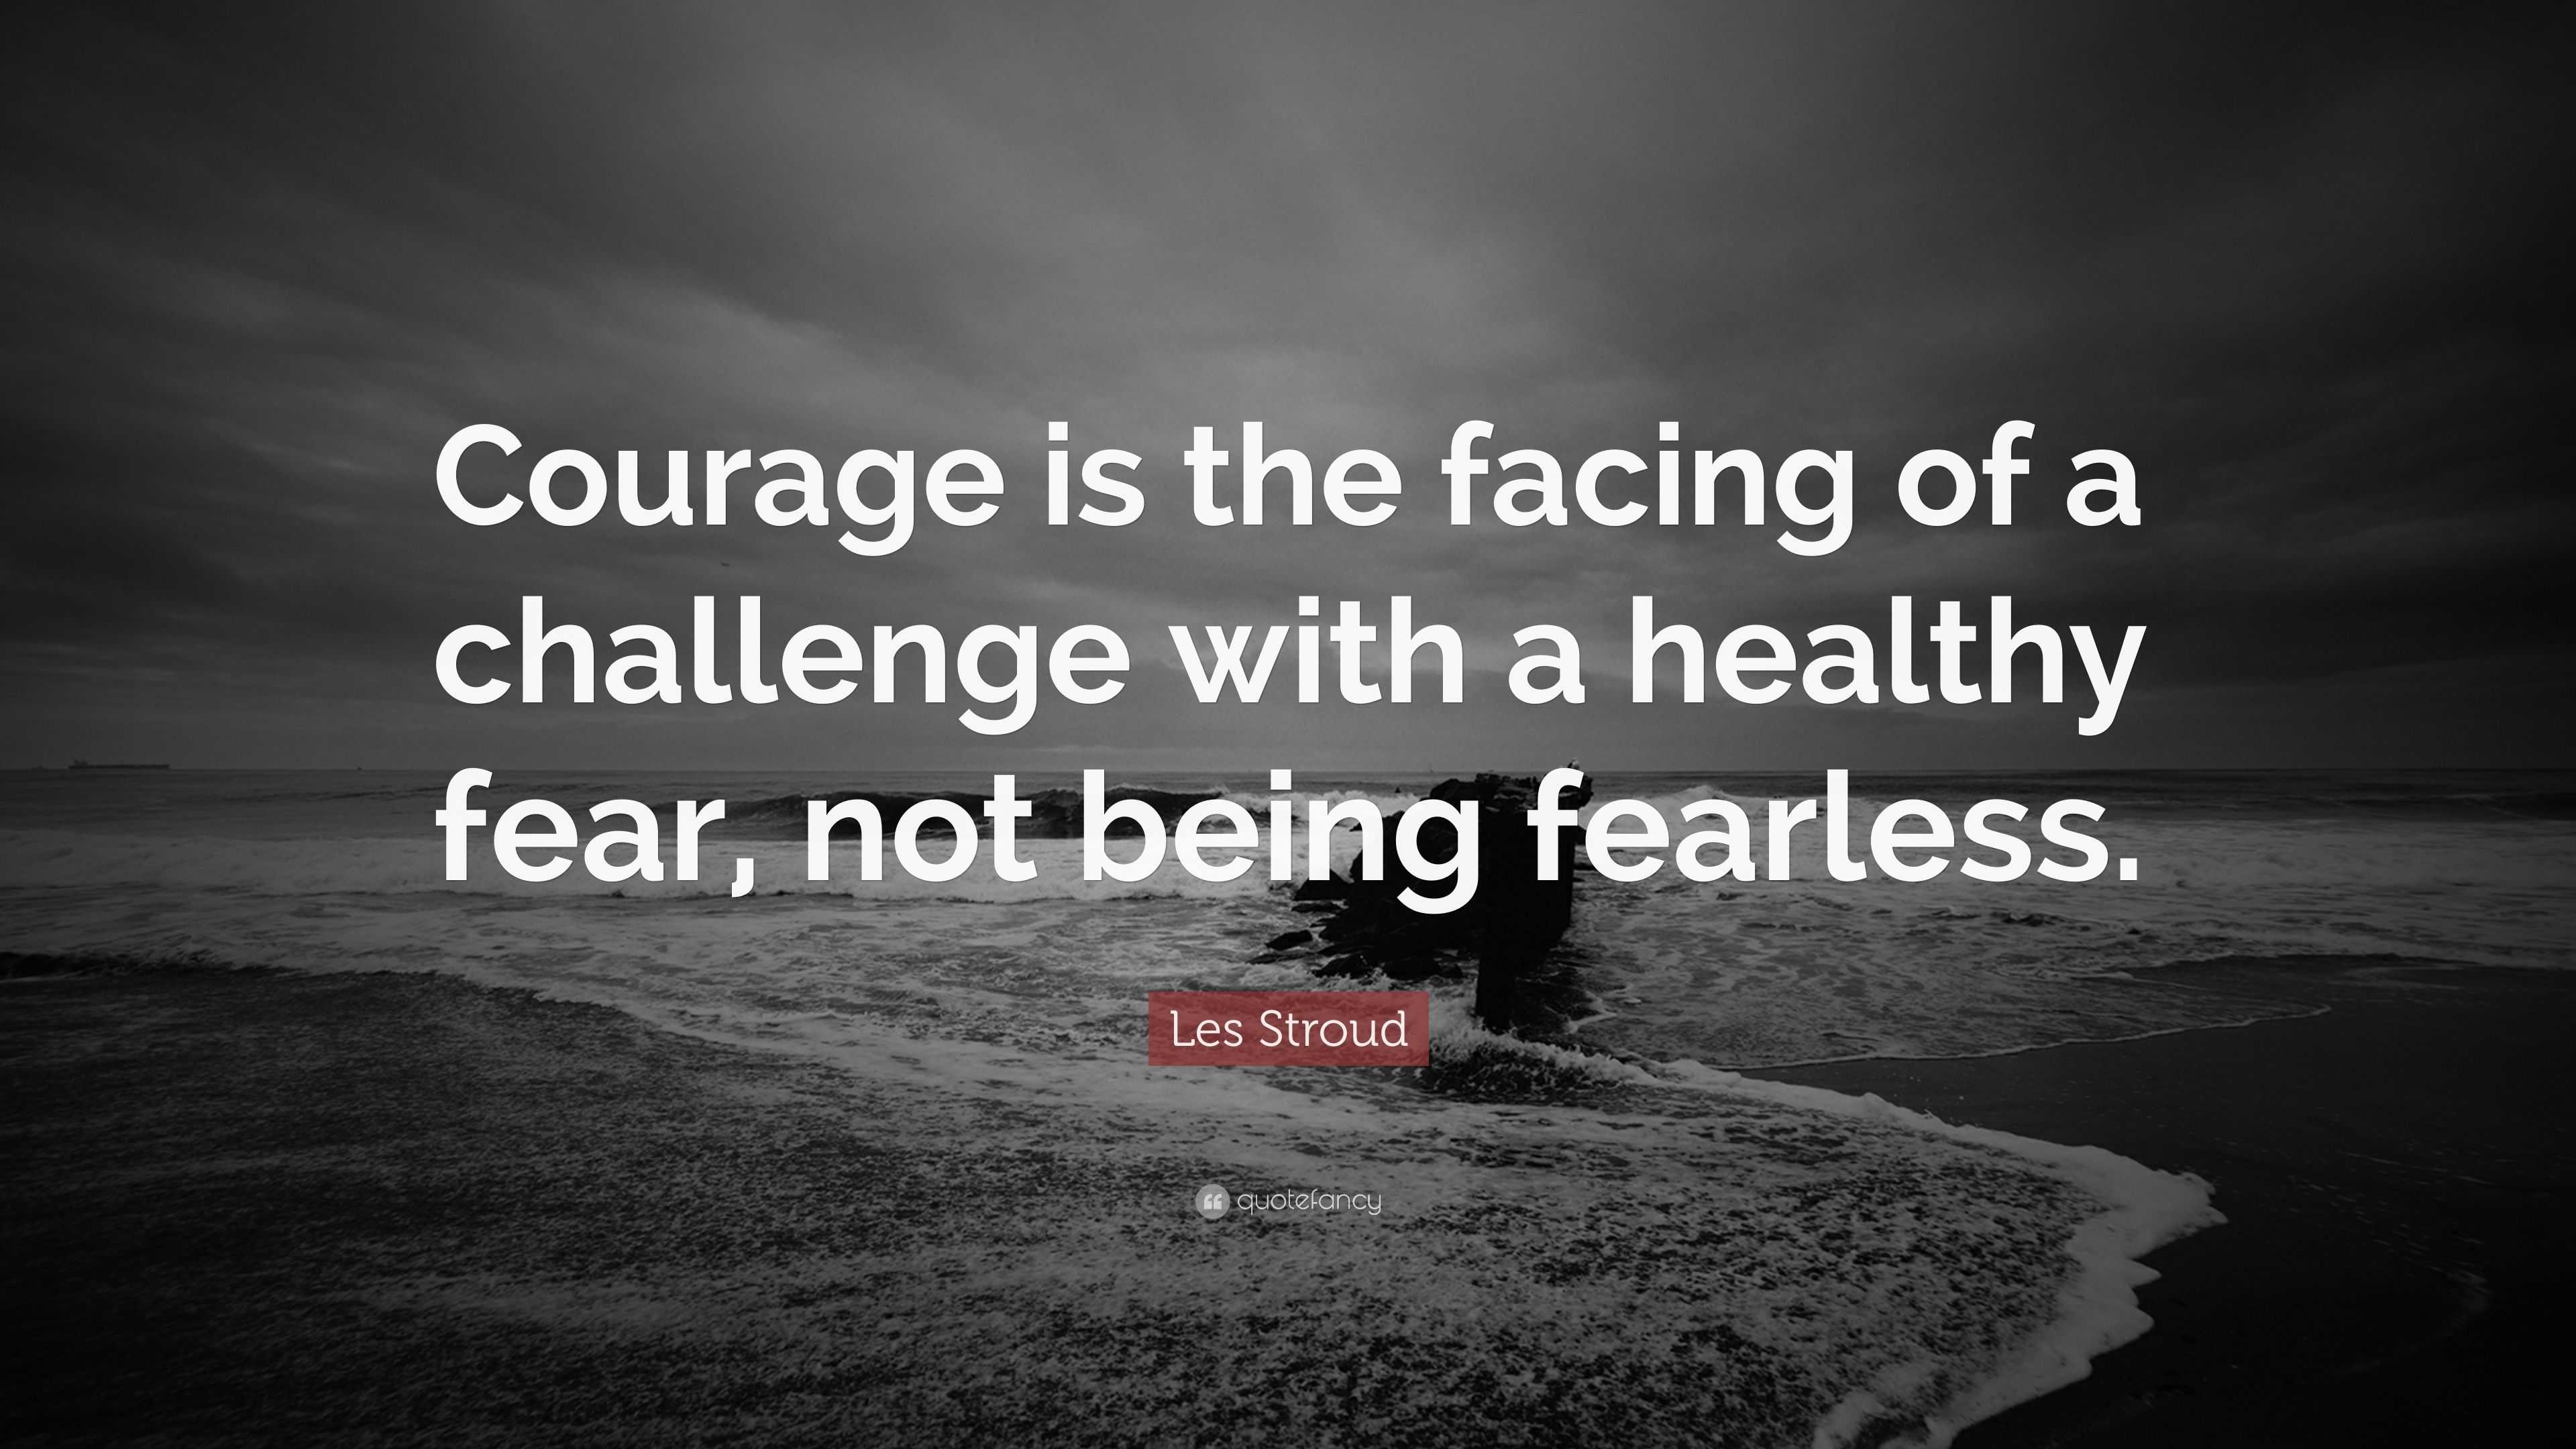 Les Stroud Quote: “Courage is the facing of a challenge with a healthy ...